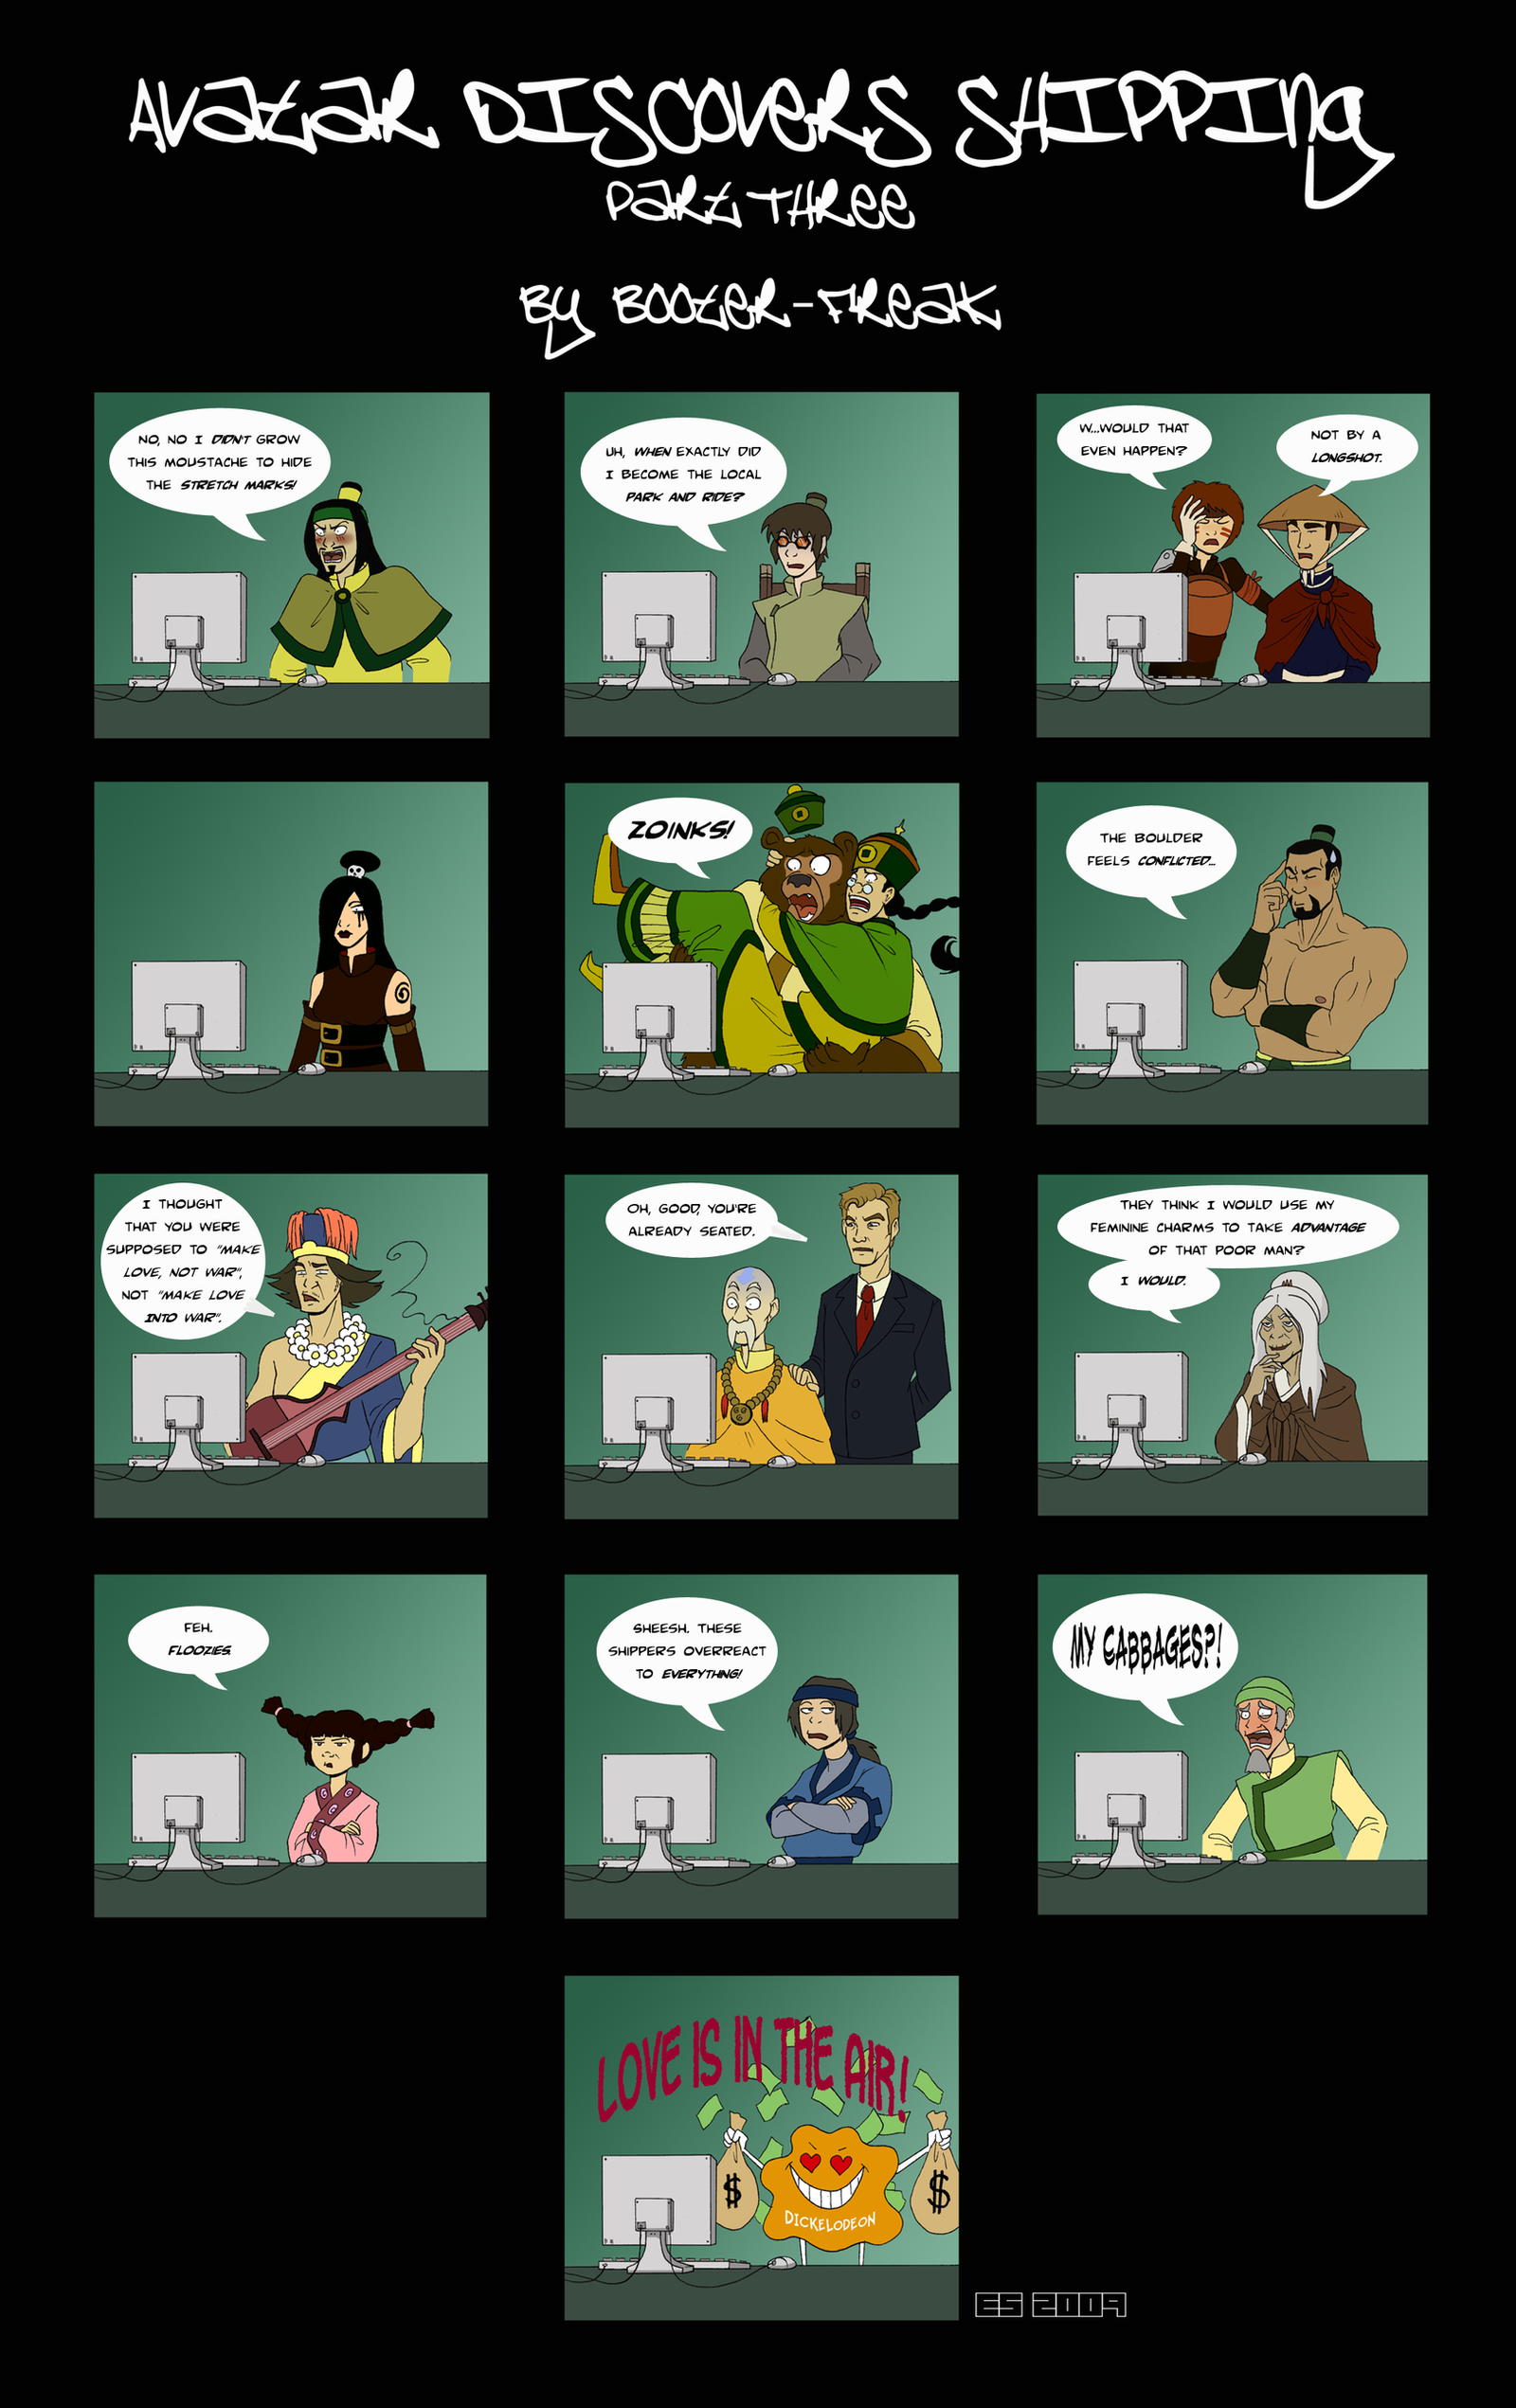 Avatar_Discovers_Shipping_3_by_Booter_Freak